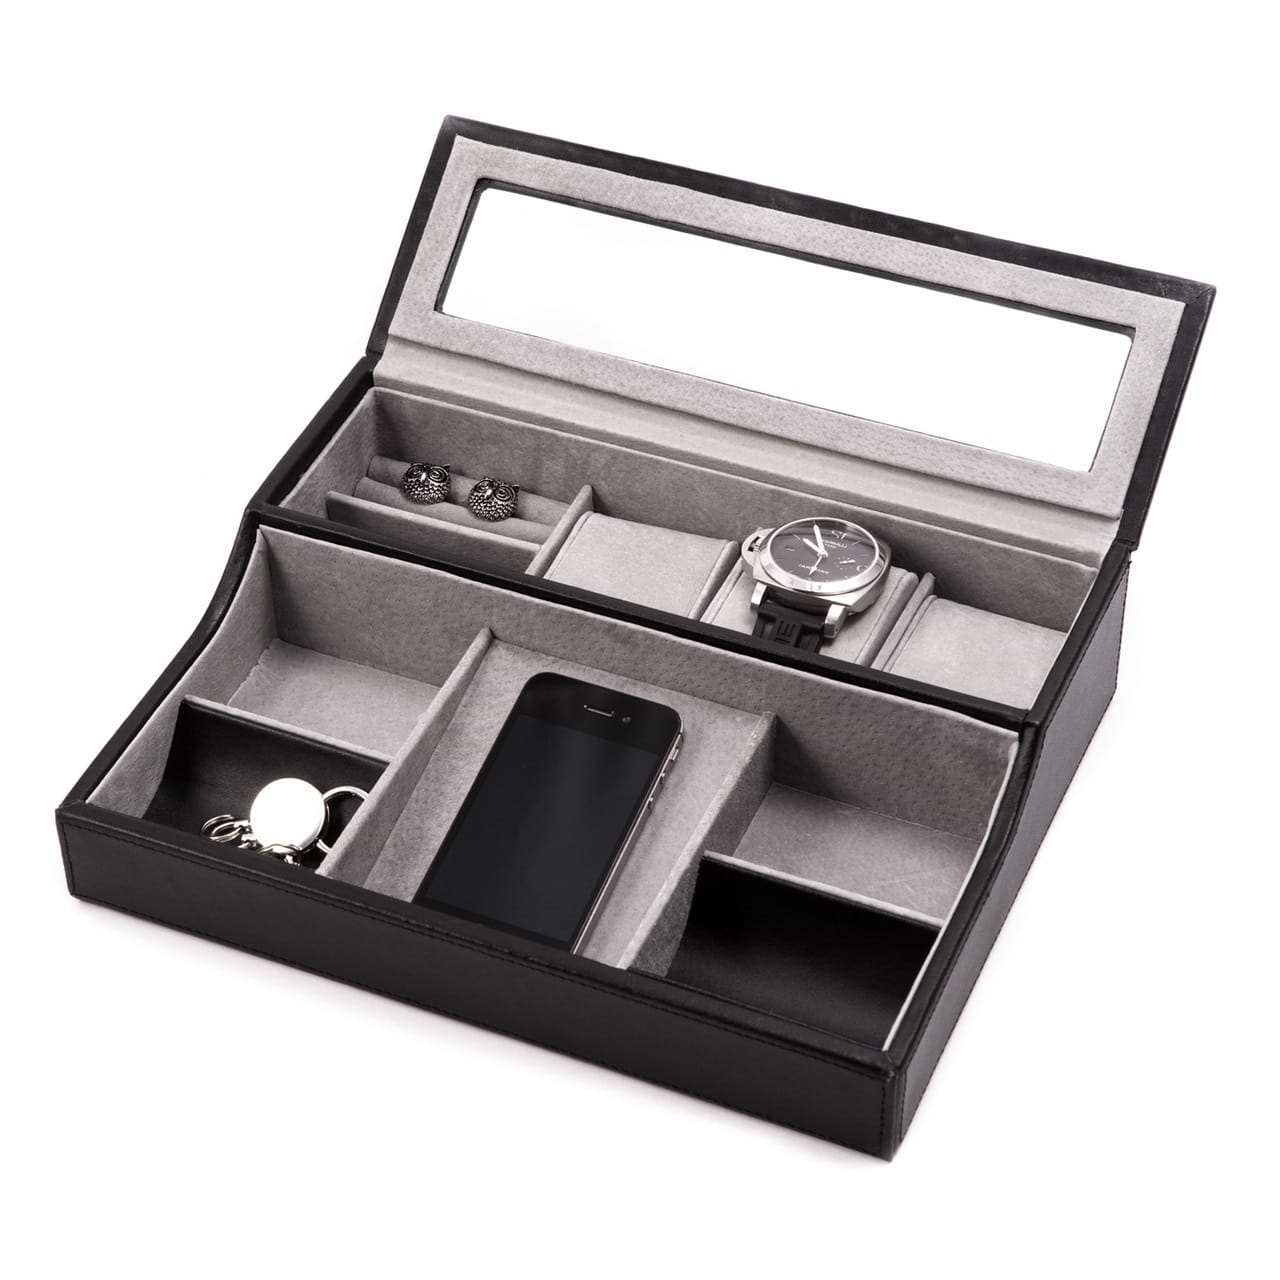 Leather Valet Watch Box For 3 Watches w/ Slots for Cufflink